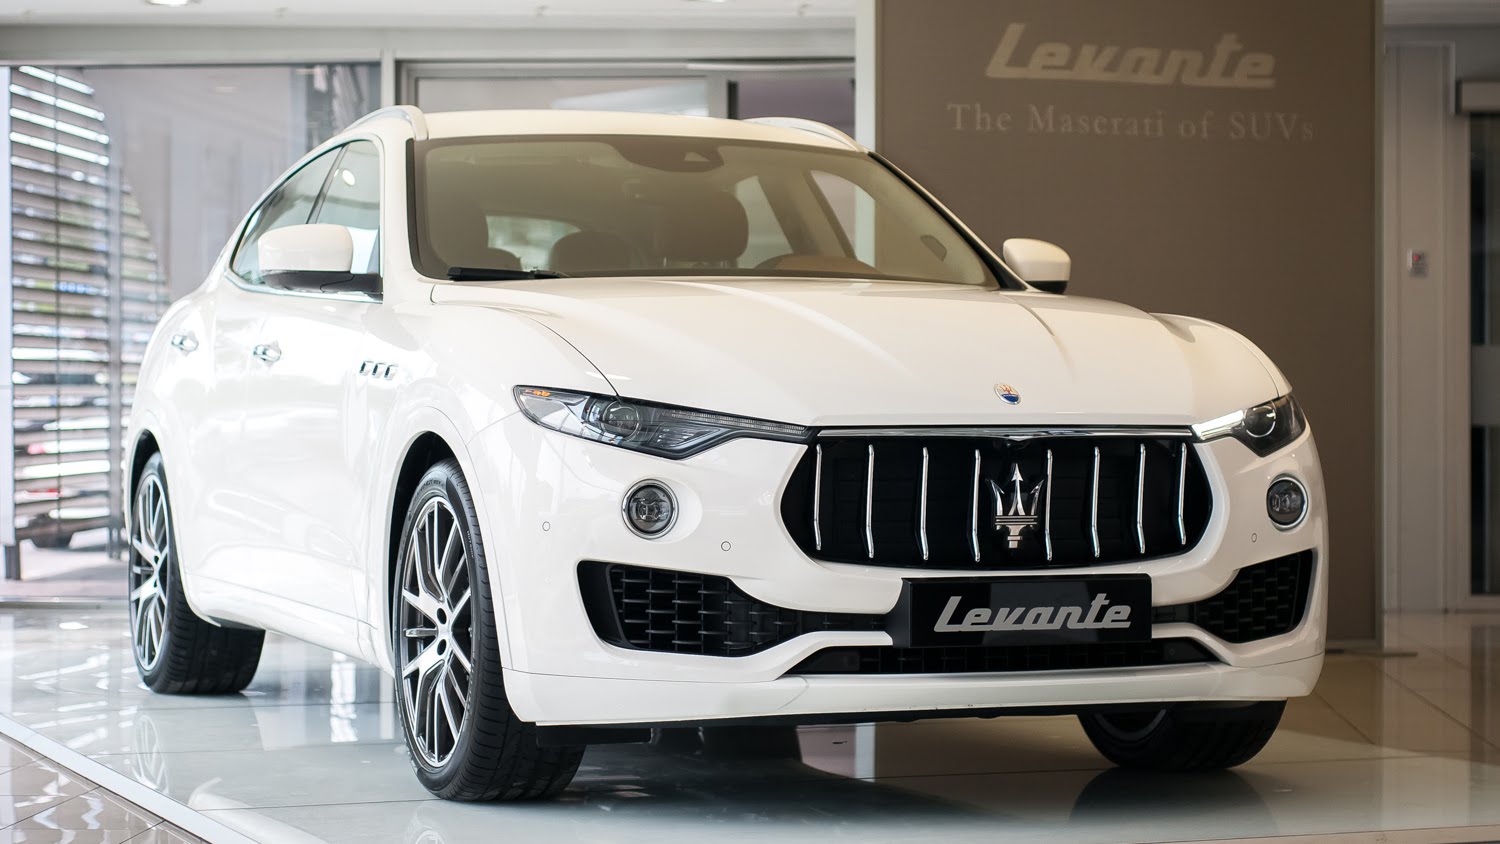 2018 Maserati Levante Launched In India At Rs 1 45 Crore